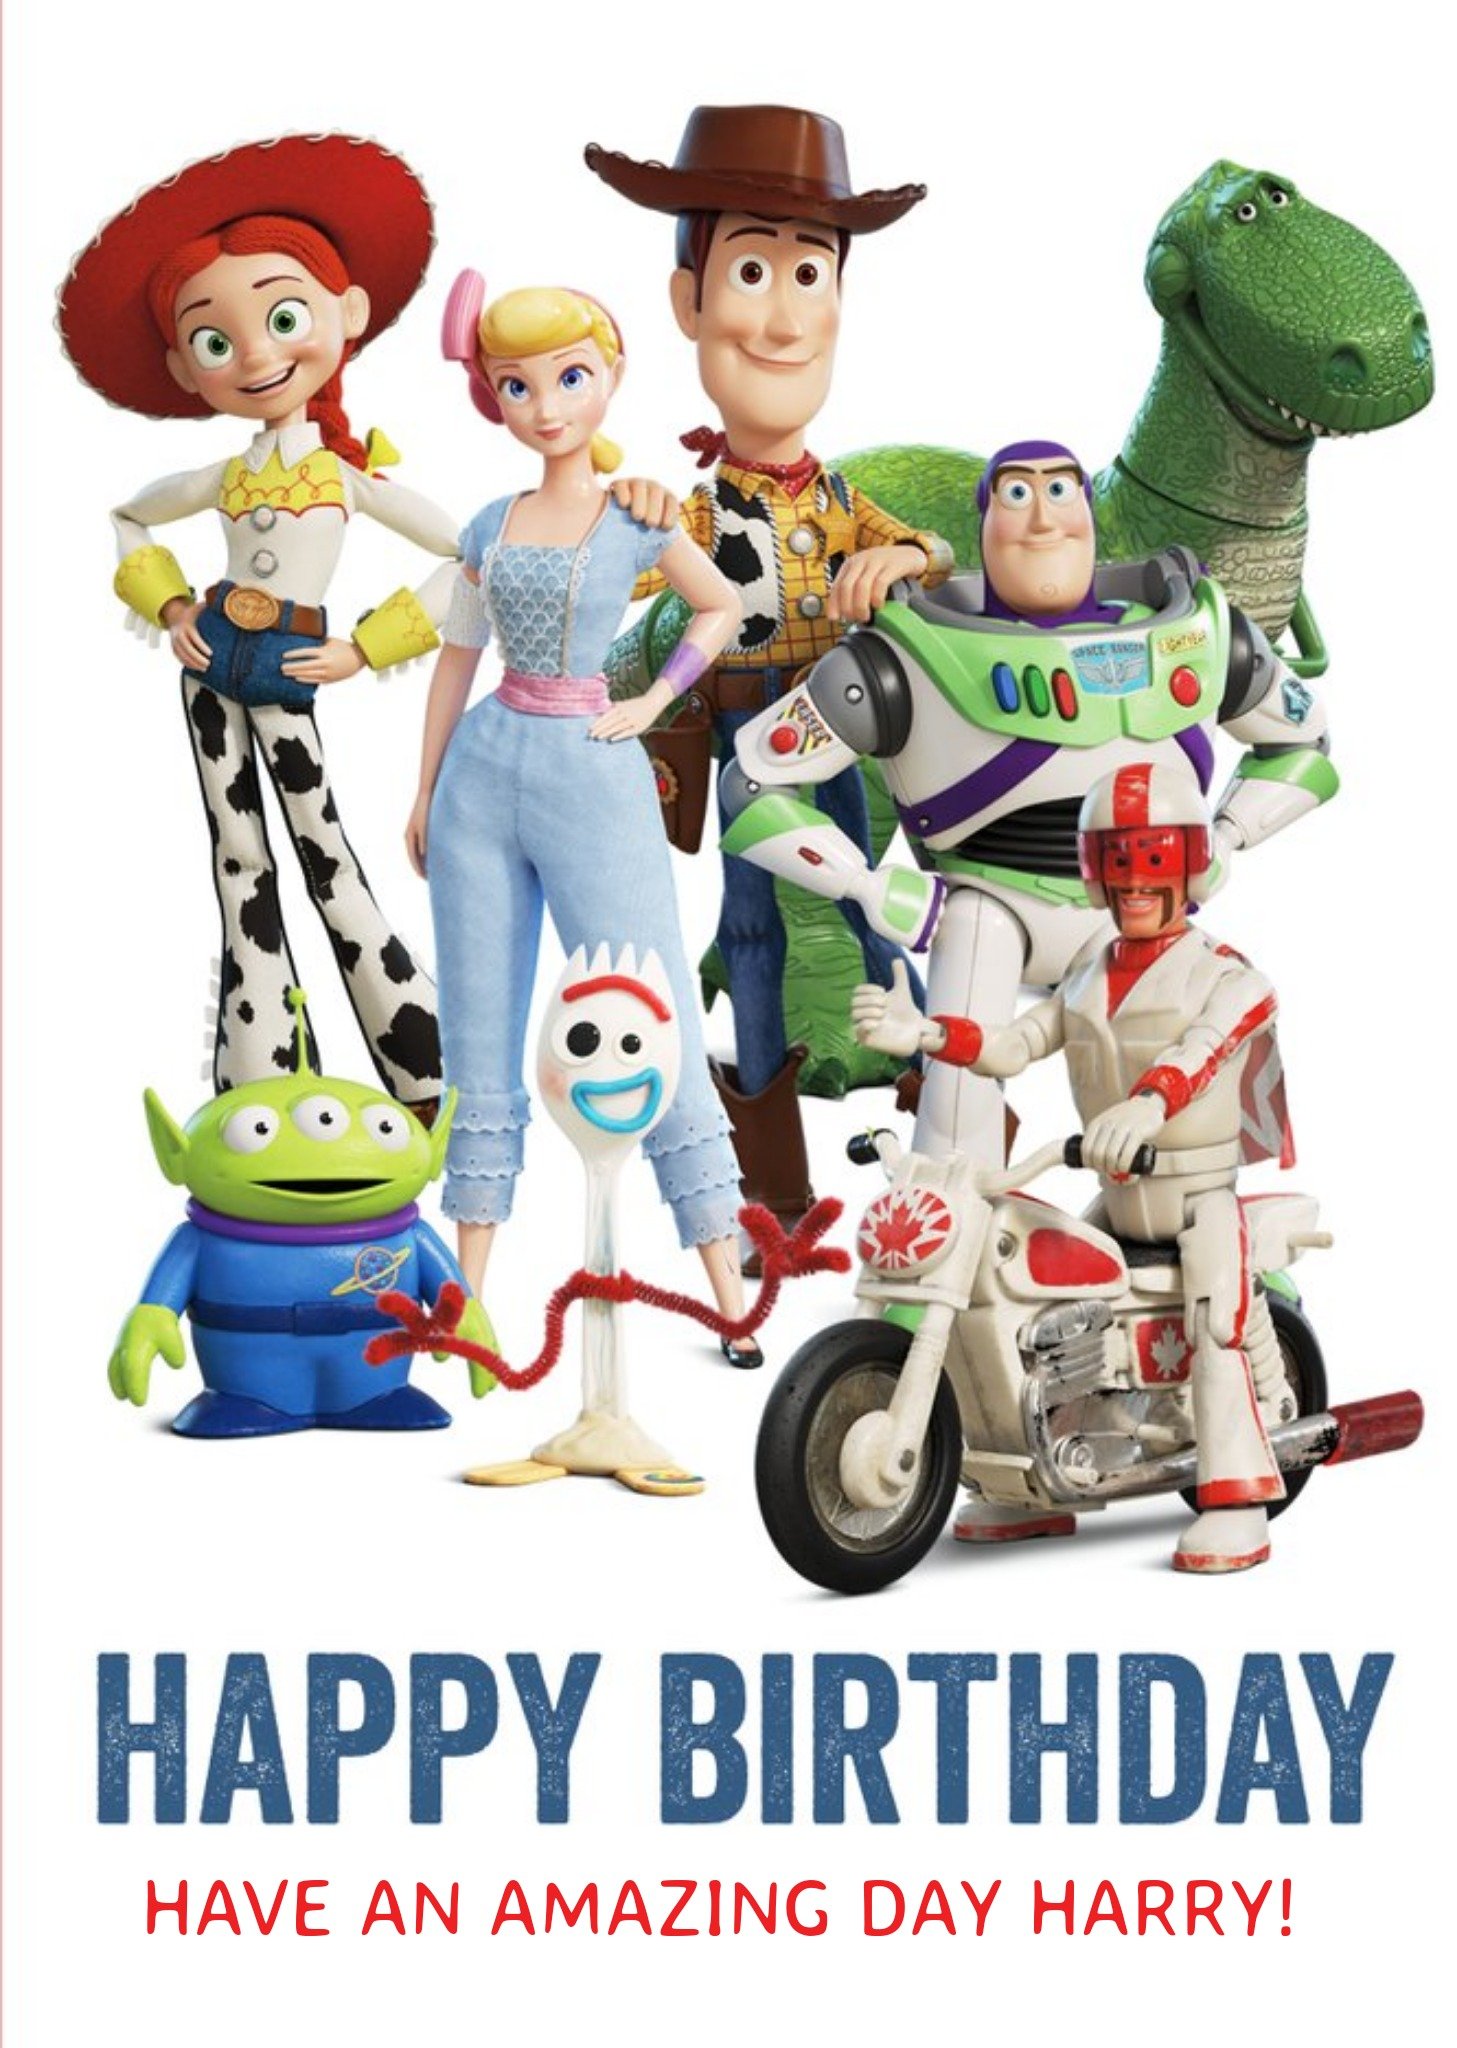 Disney Toy Story 4 Characters - Birthday Card Ecard